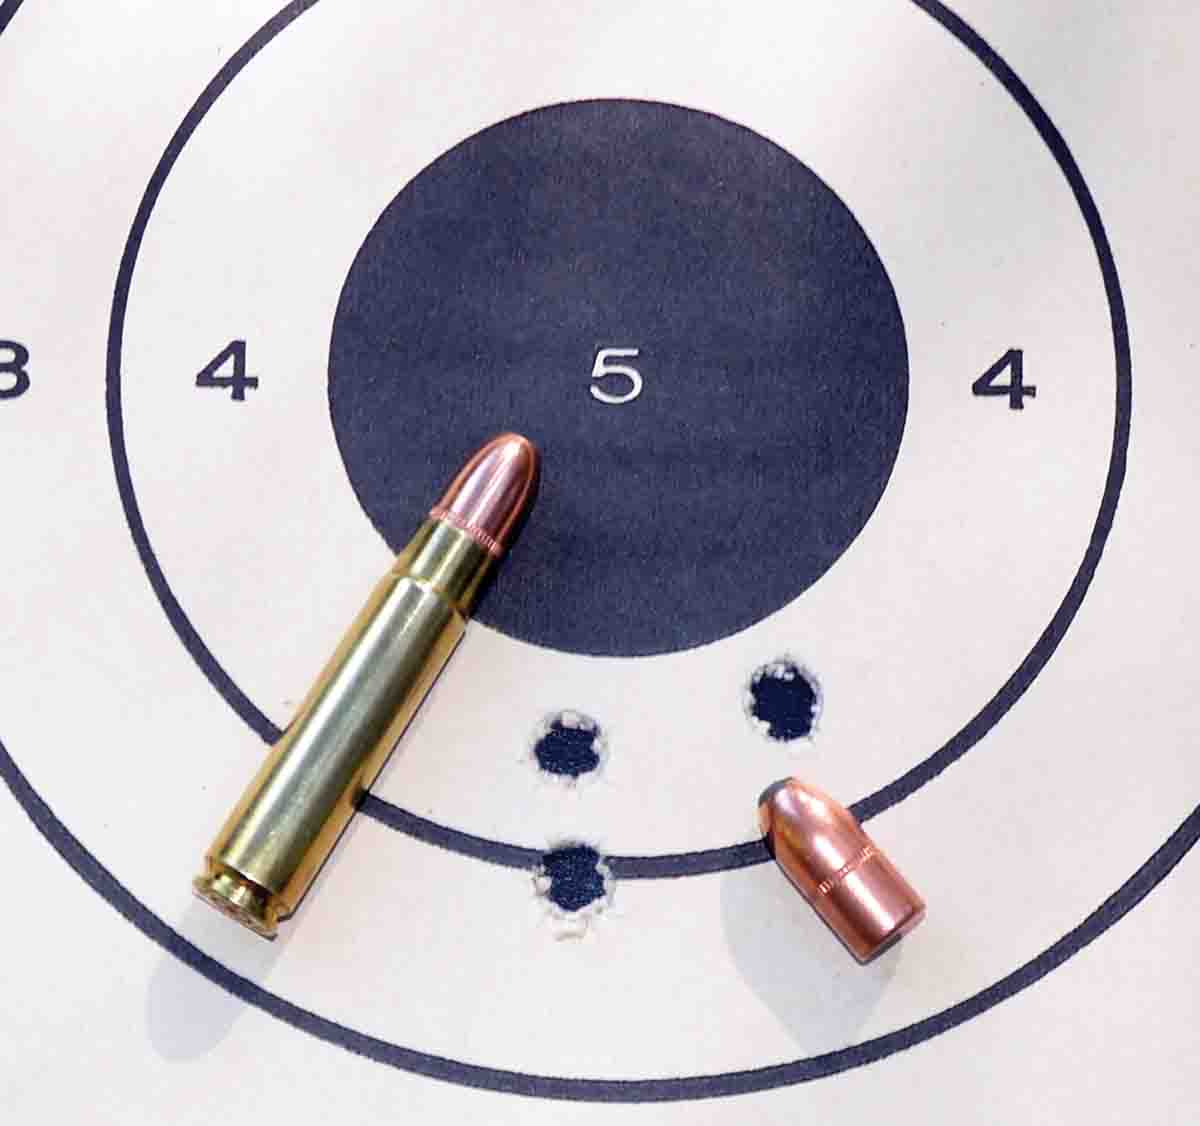 This group fired at 200 meters with the Northern Precision 300-grain bullet pushed to 2,350 fps by 53 grains of Benchmark measured 1.41 inches.